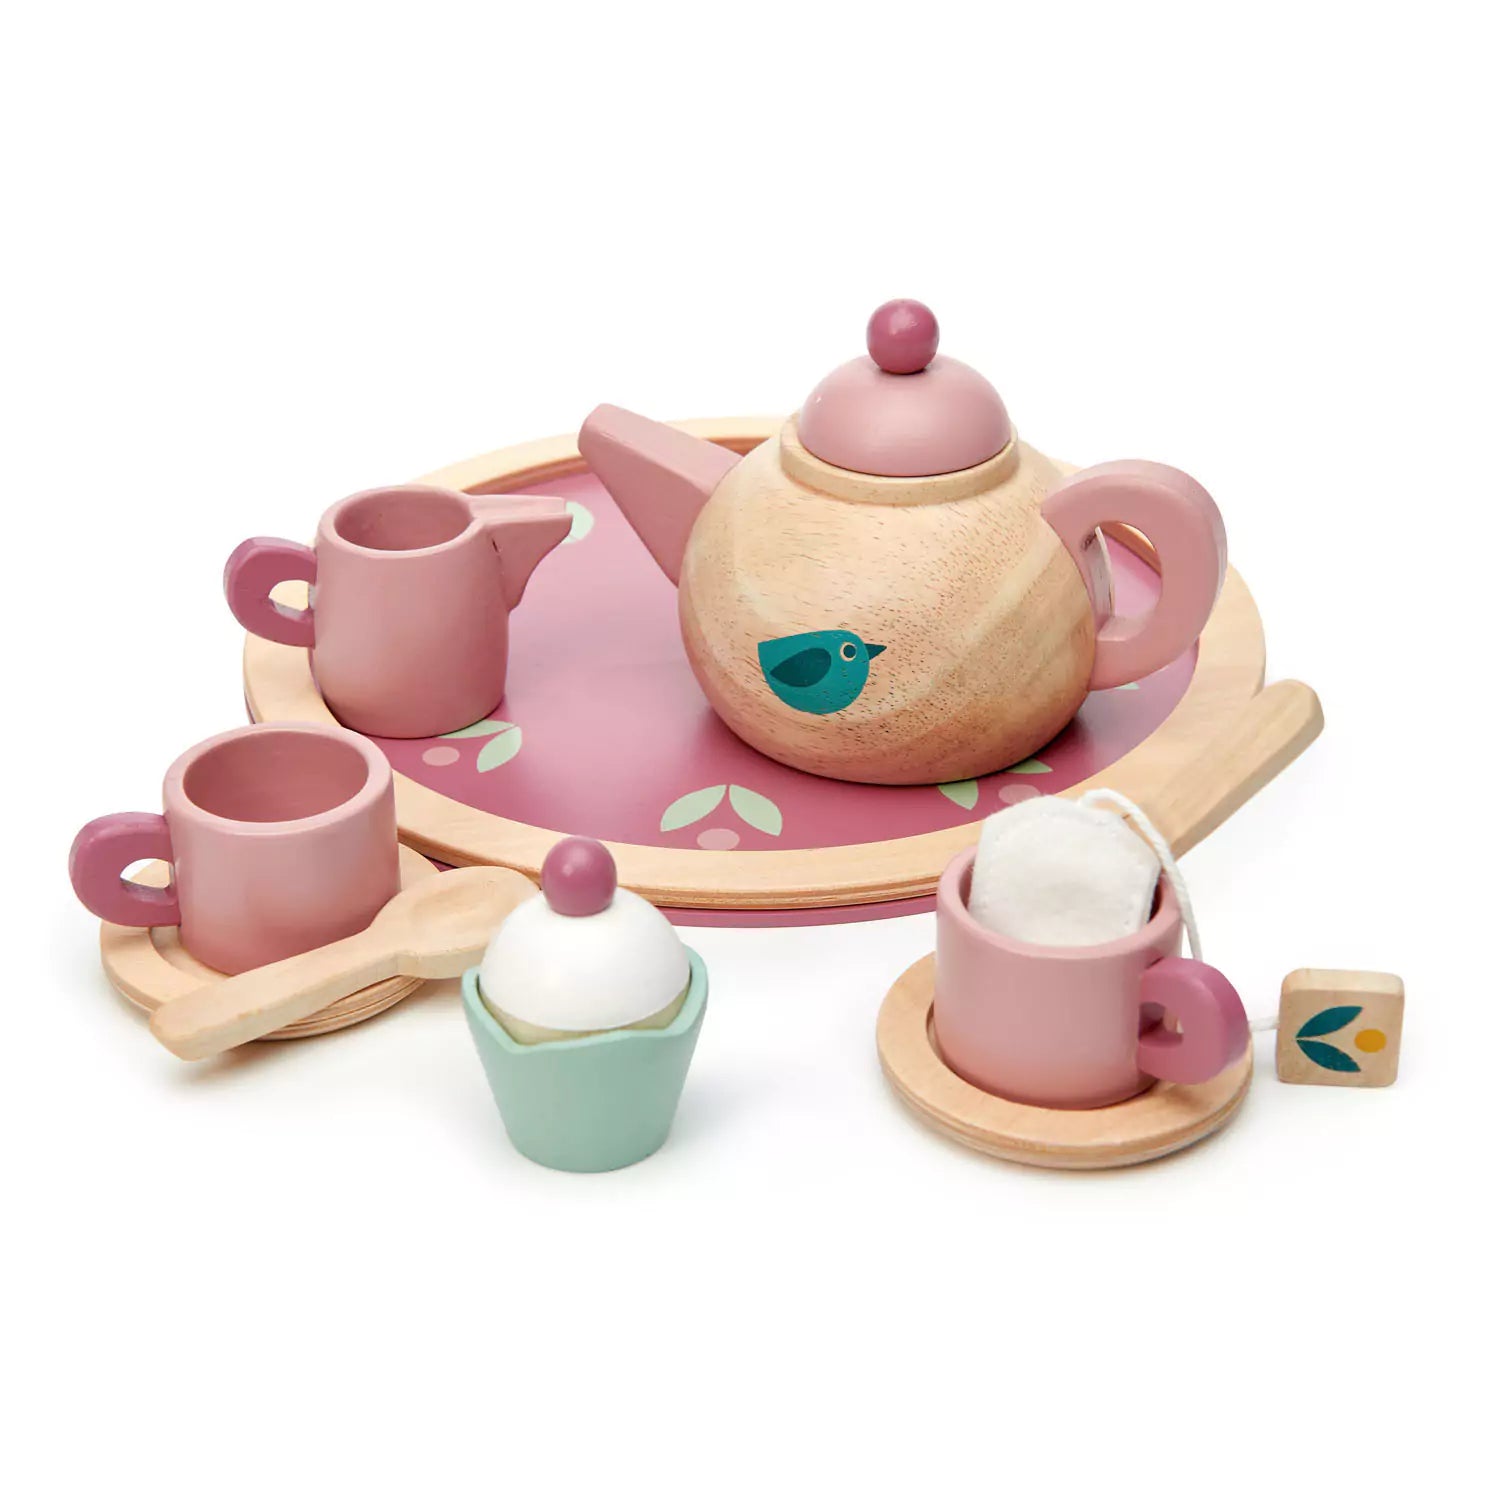 An image of Wooden Tea Set - Kids Pretend Play - Play Kitchen Accessories | Tender Leaf